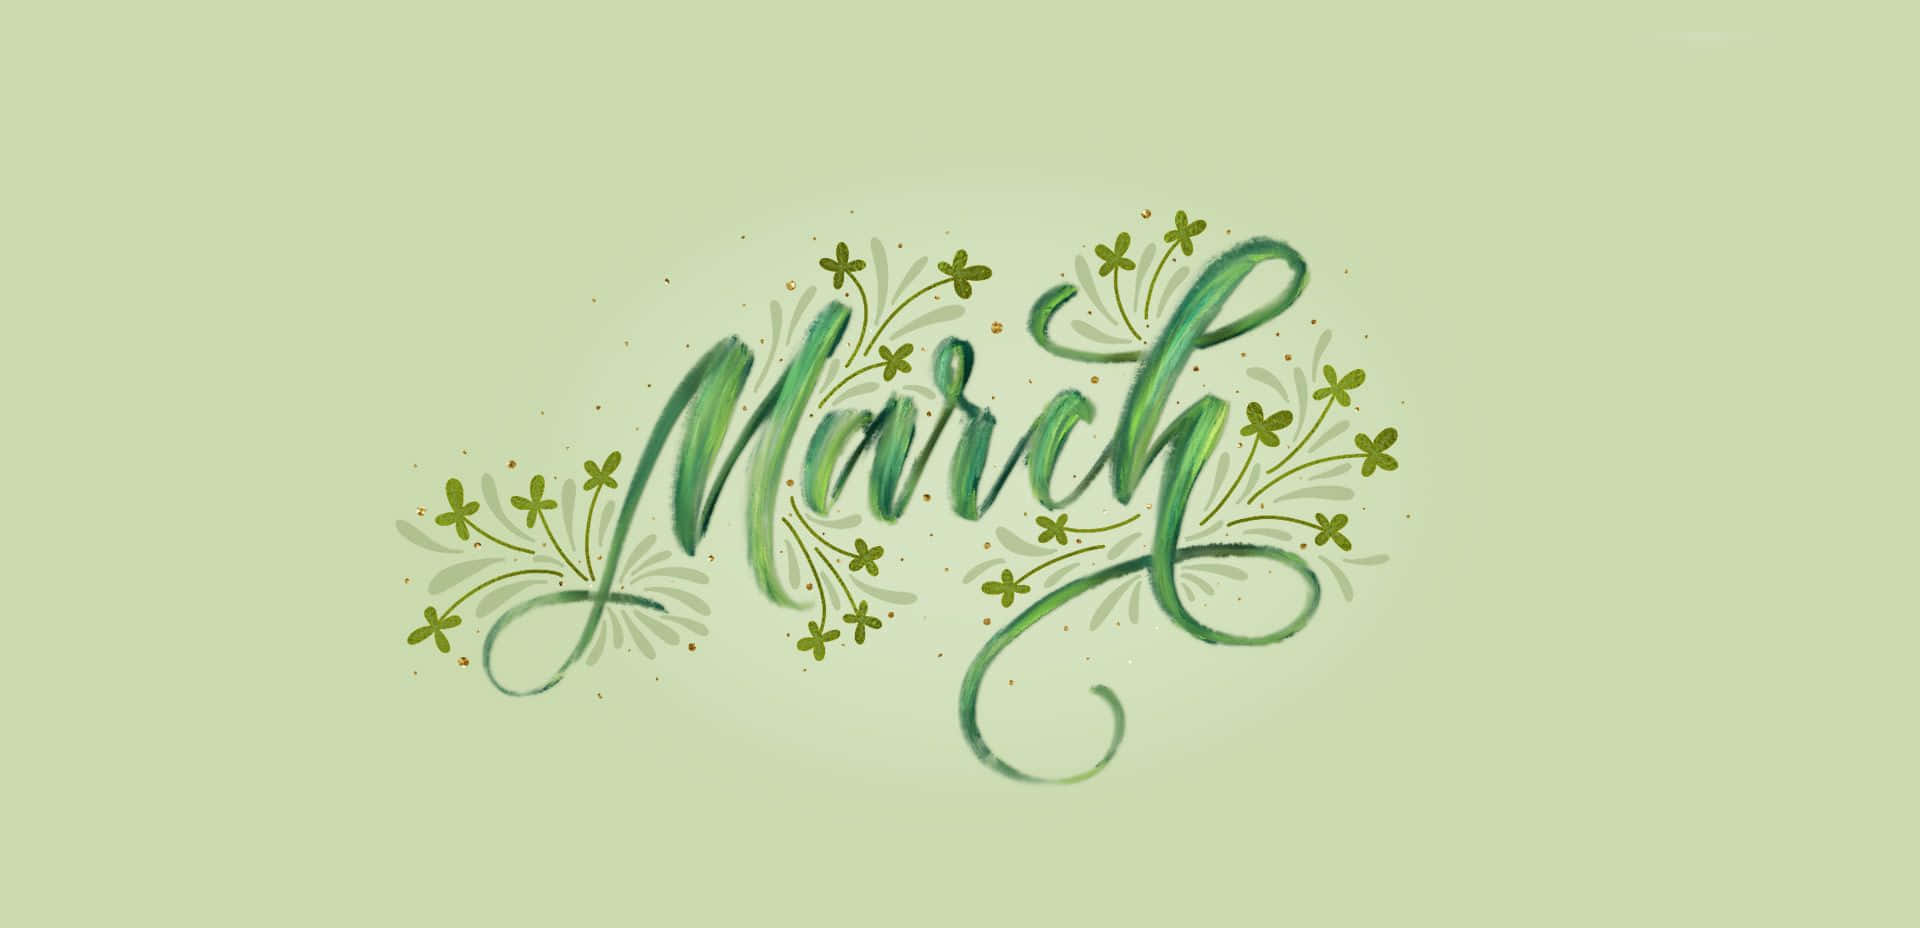 A Green Background With The Word March Written On It Wallpaper